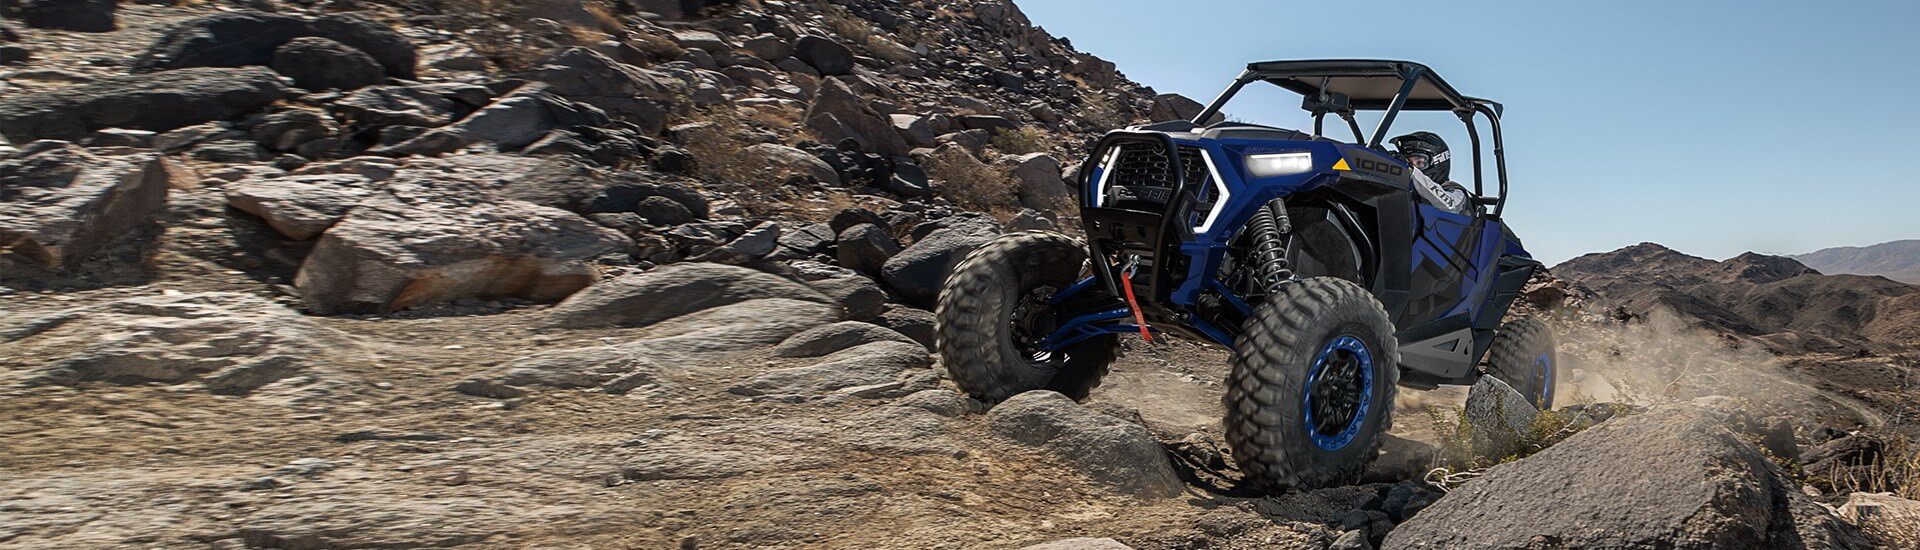 RZR XP 1000 TRAILS AND ROCKS EDITION Image